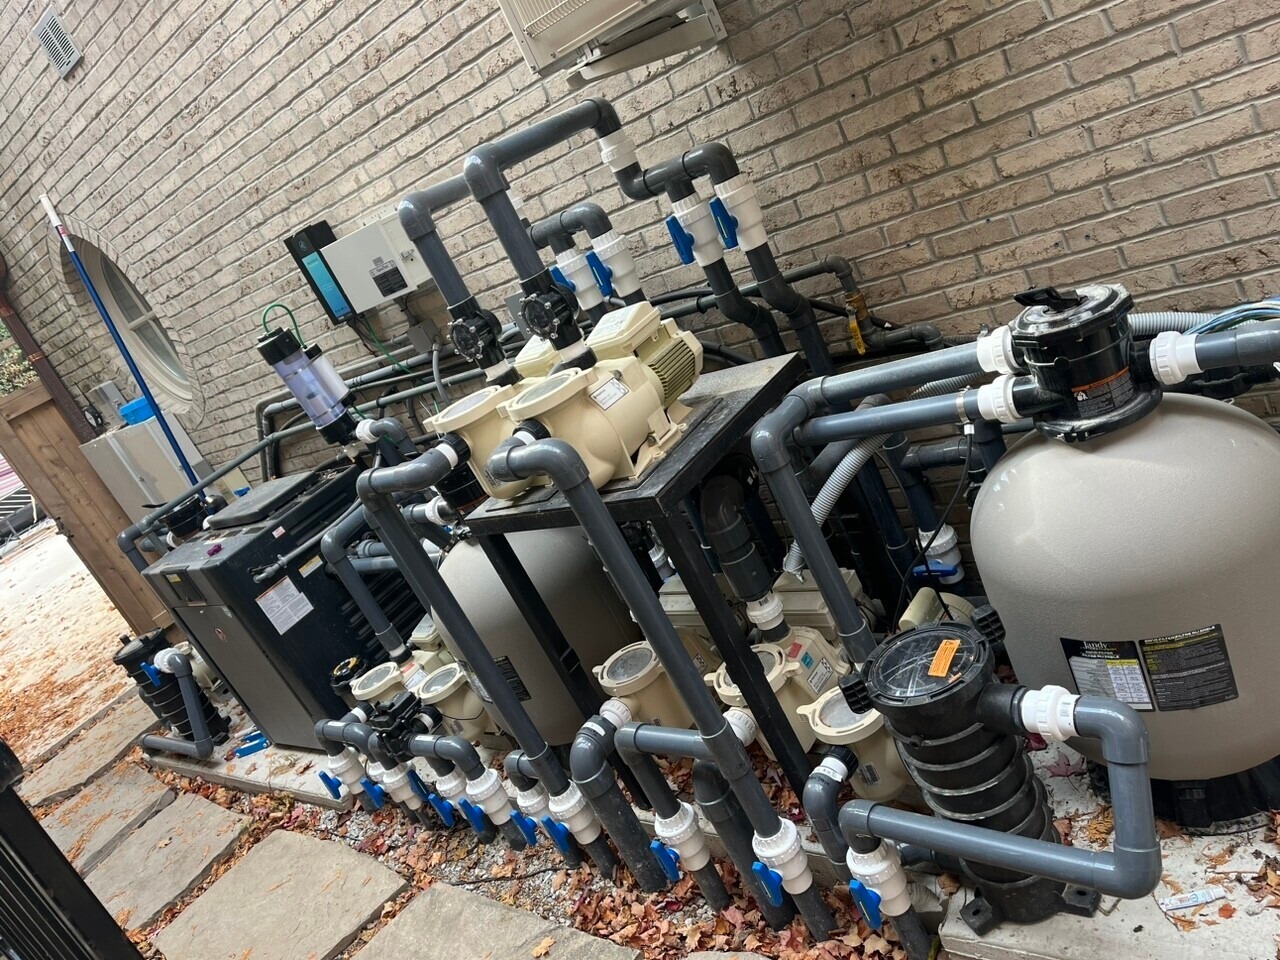 The image shows an outdoor pool mechanical system with pumps, filters, and pipes, positioned against a brick wall on a paved area.